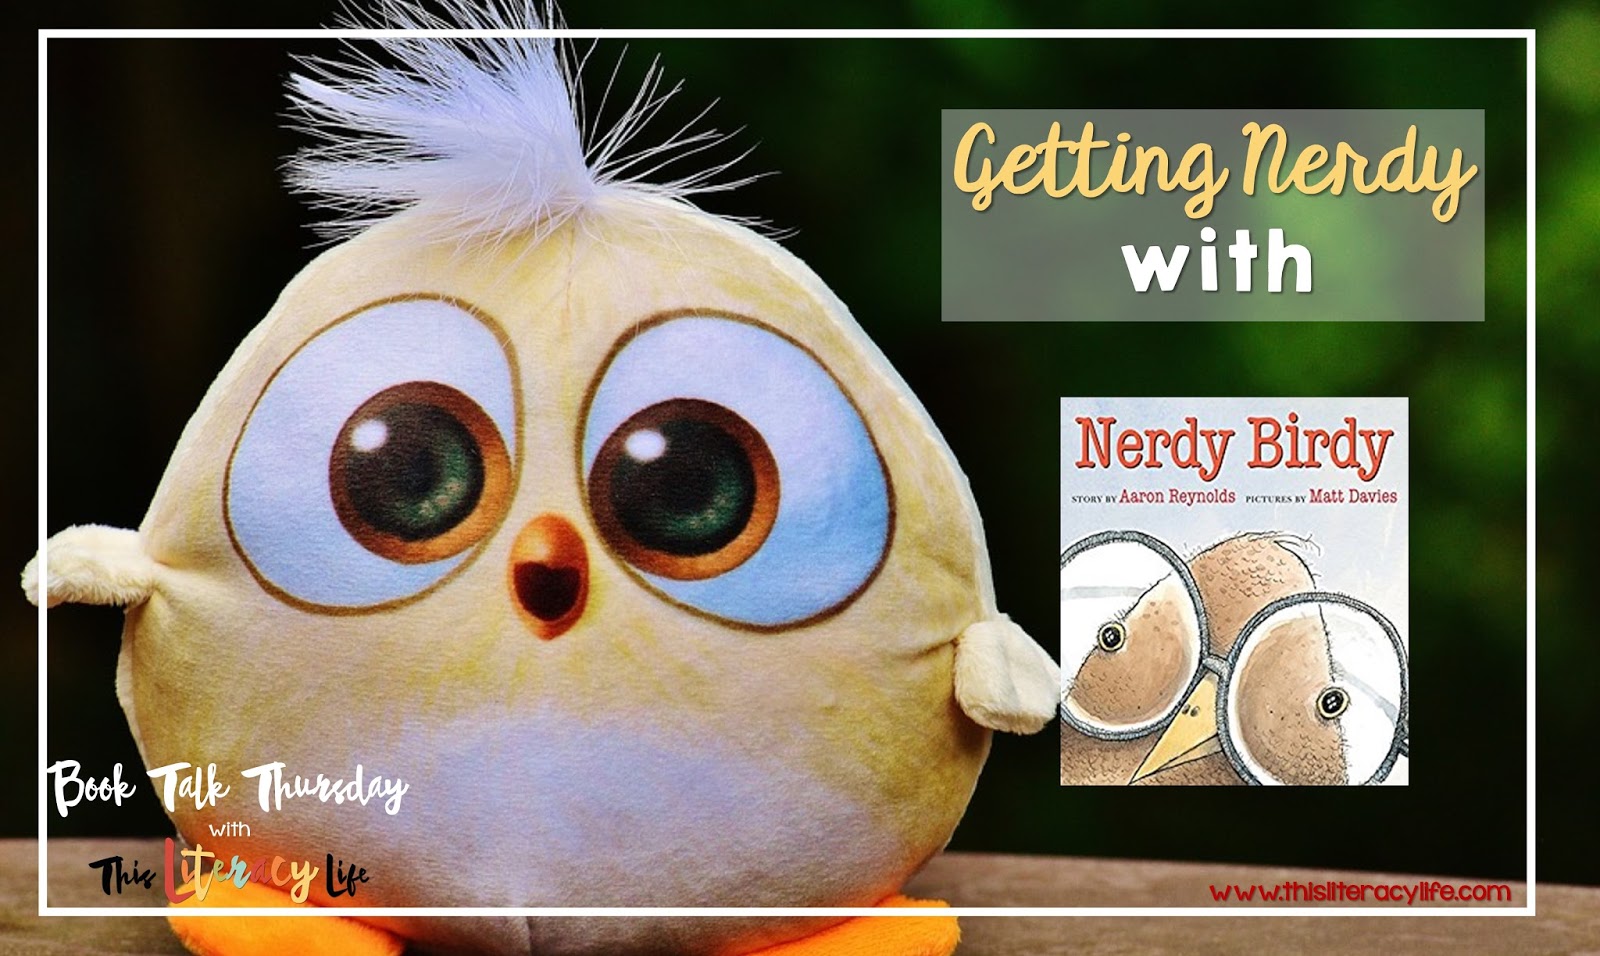 Using Nerdy Birdy will help students better understand author's craft and why they author uses specific ideas to make a story interesting. Delving deeper into author's purpose helps students better understand the ideas in a story.